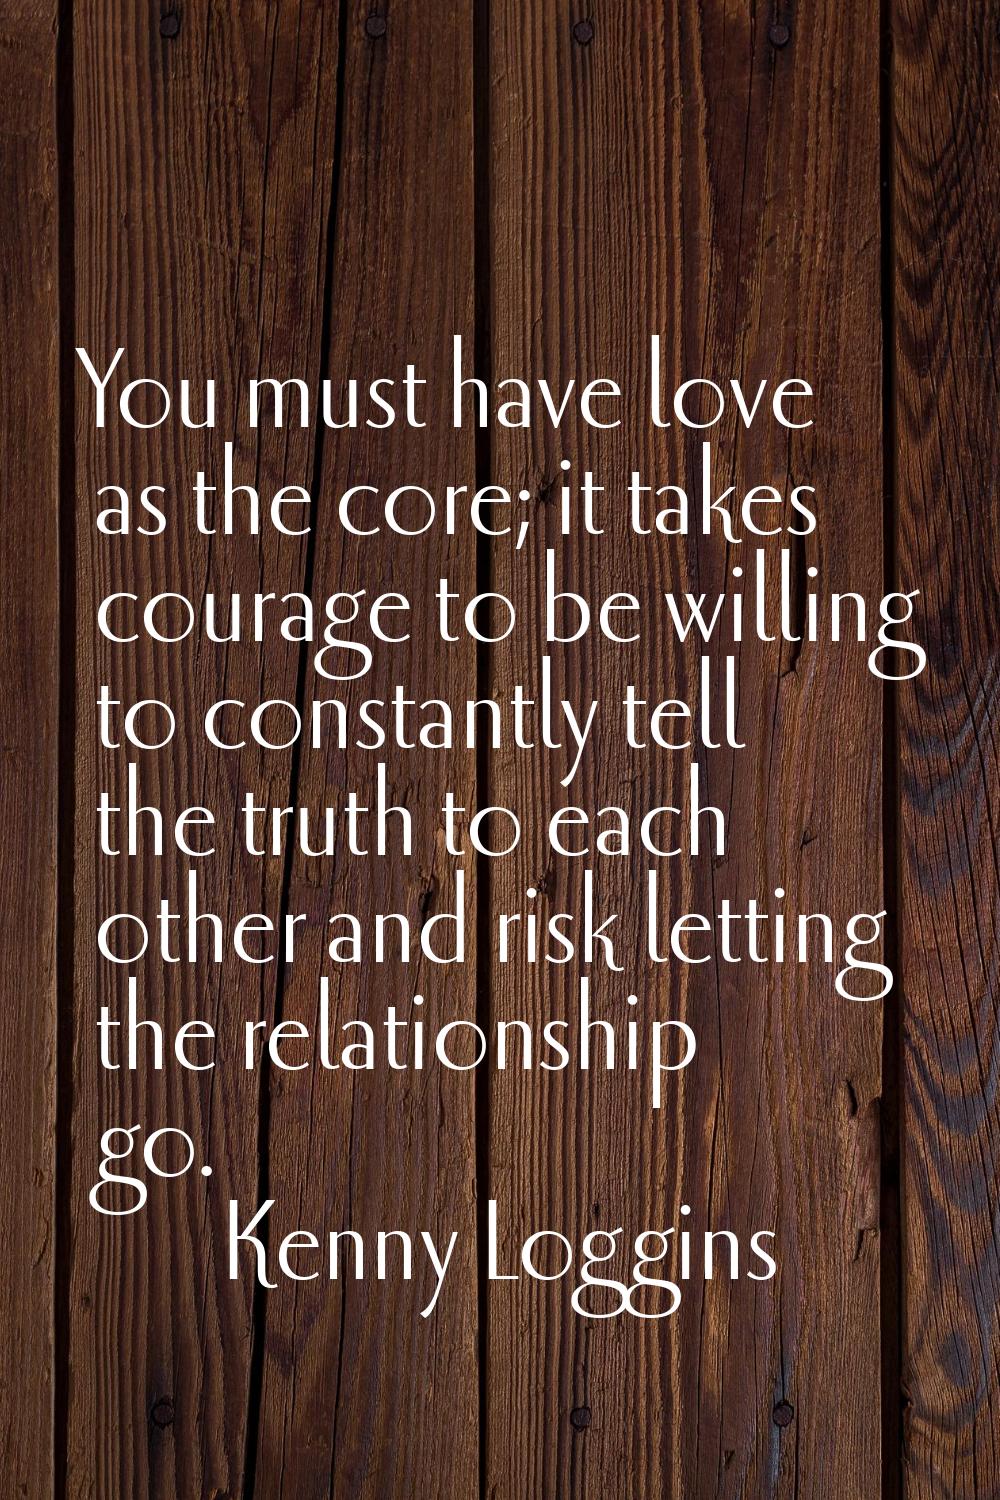 You must have love as the core; it takes courage to be willing to constantly tell the truth to each